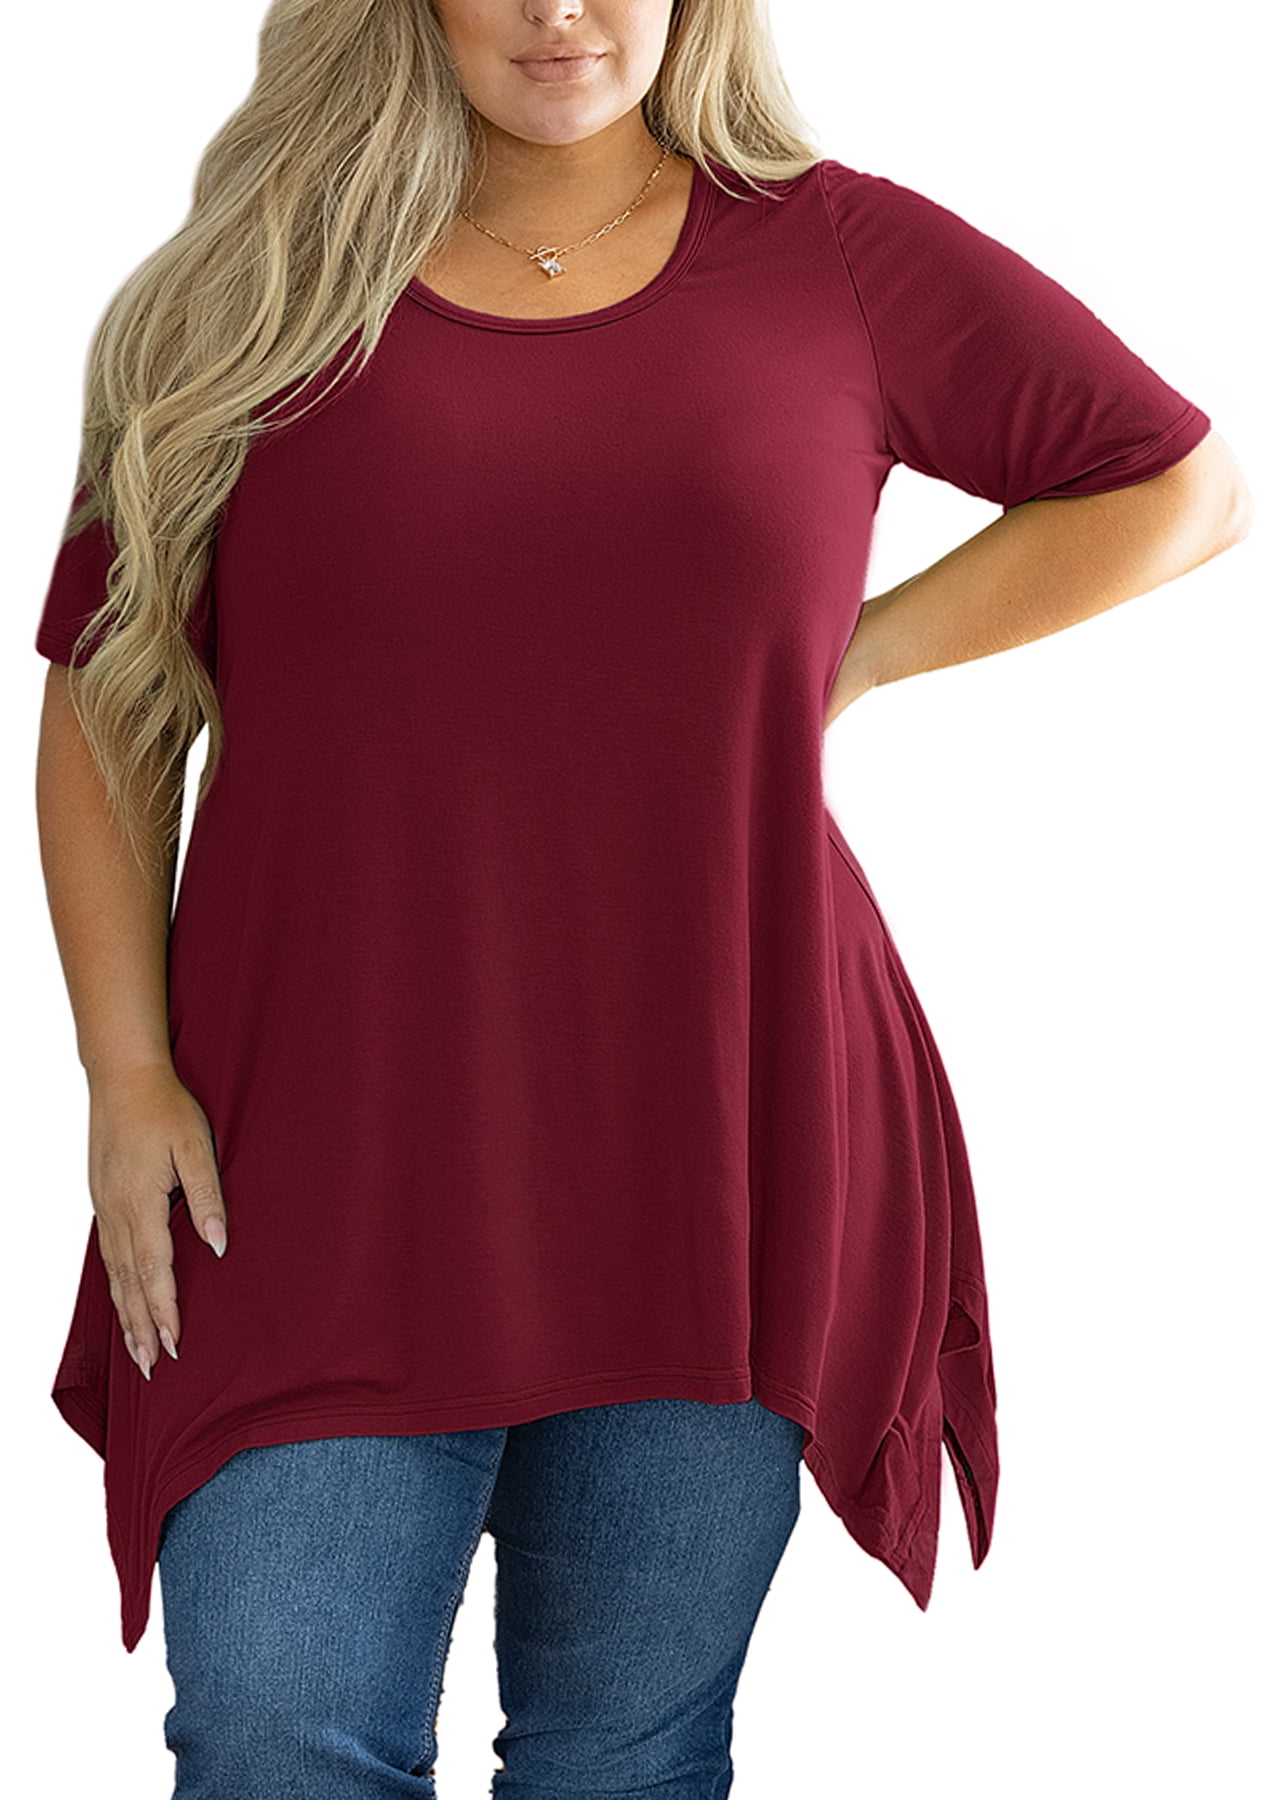 SHOWMALL Plus Size Tops for Women Tunic Clothes Short Sleeve Black Blouse  4X Summer Swing Tee Crewneck Clothing Flowy Shirt for Leggings 